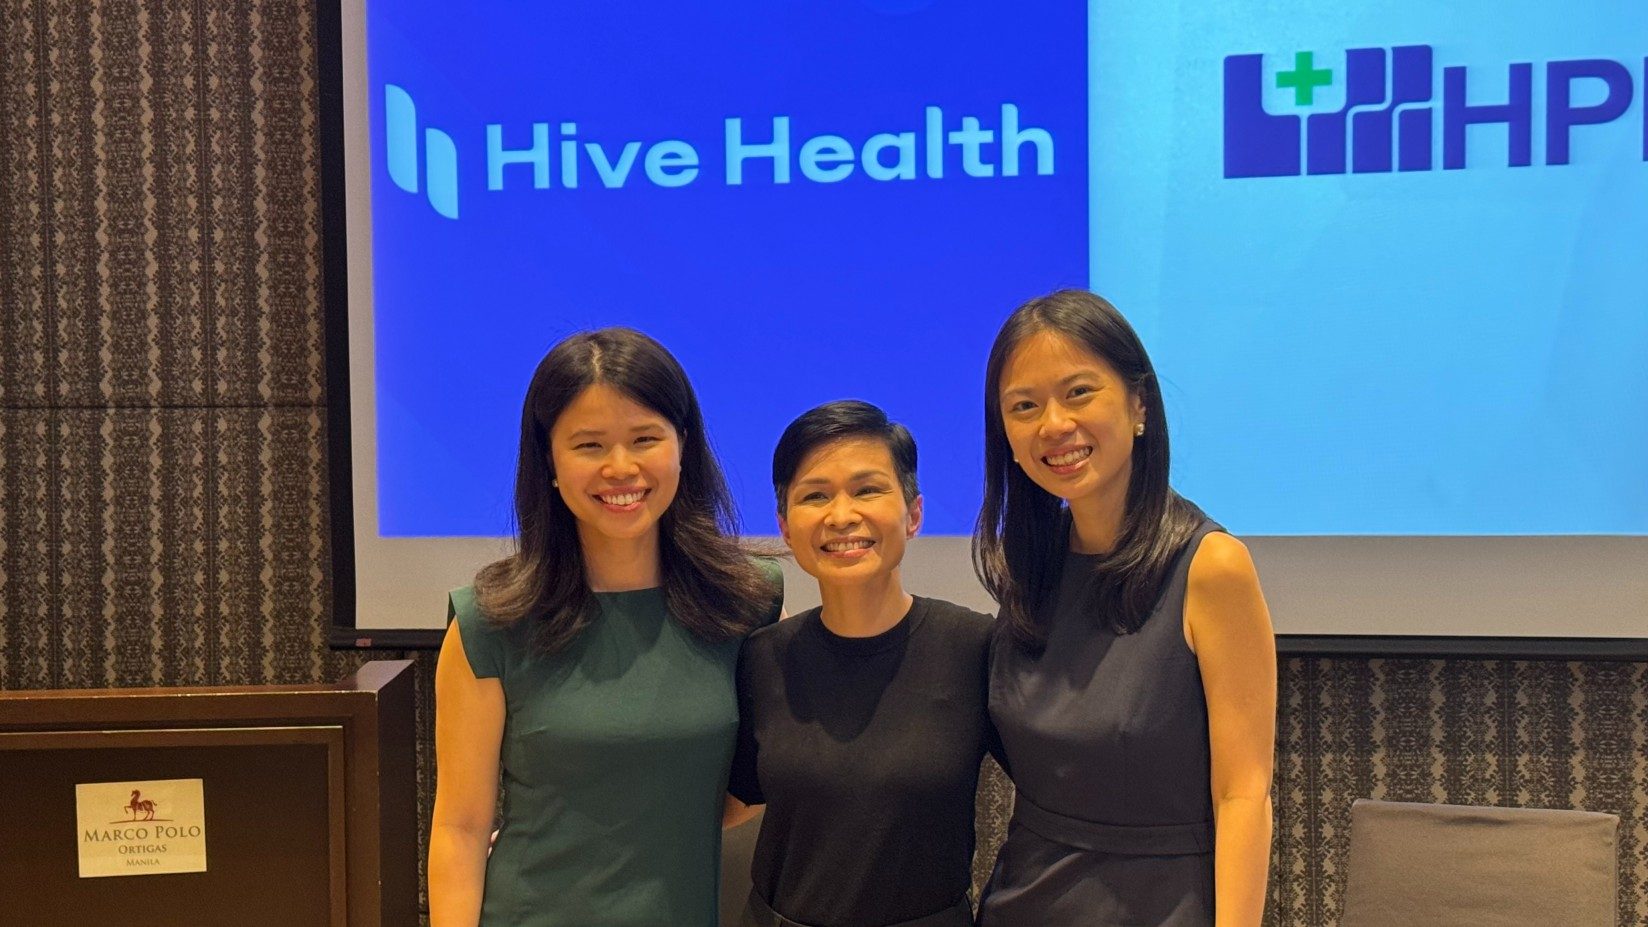 Hive Health’s digital platform promises faster insurance policy processing for SMEs